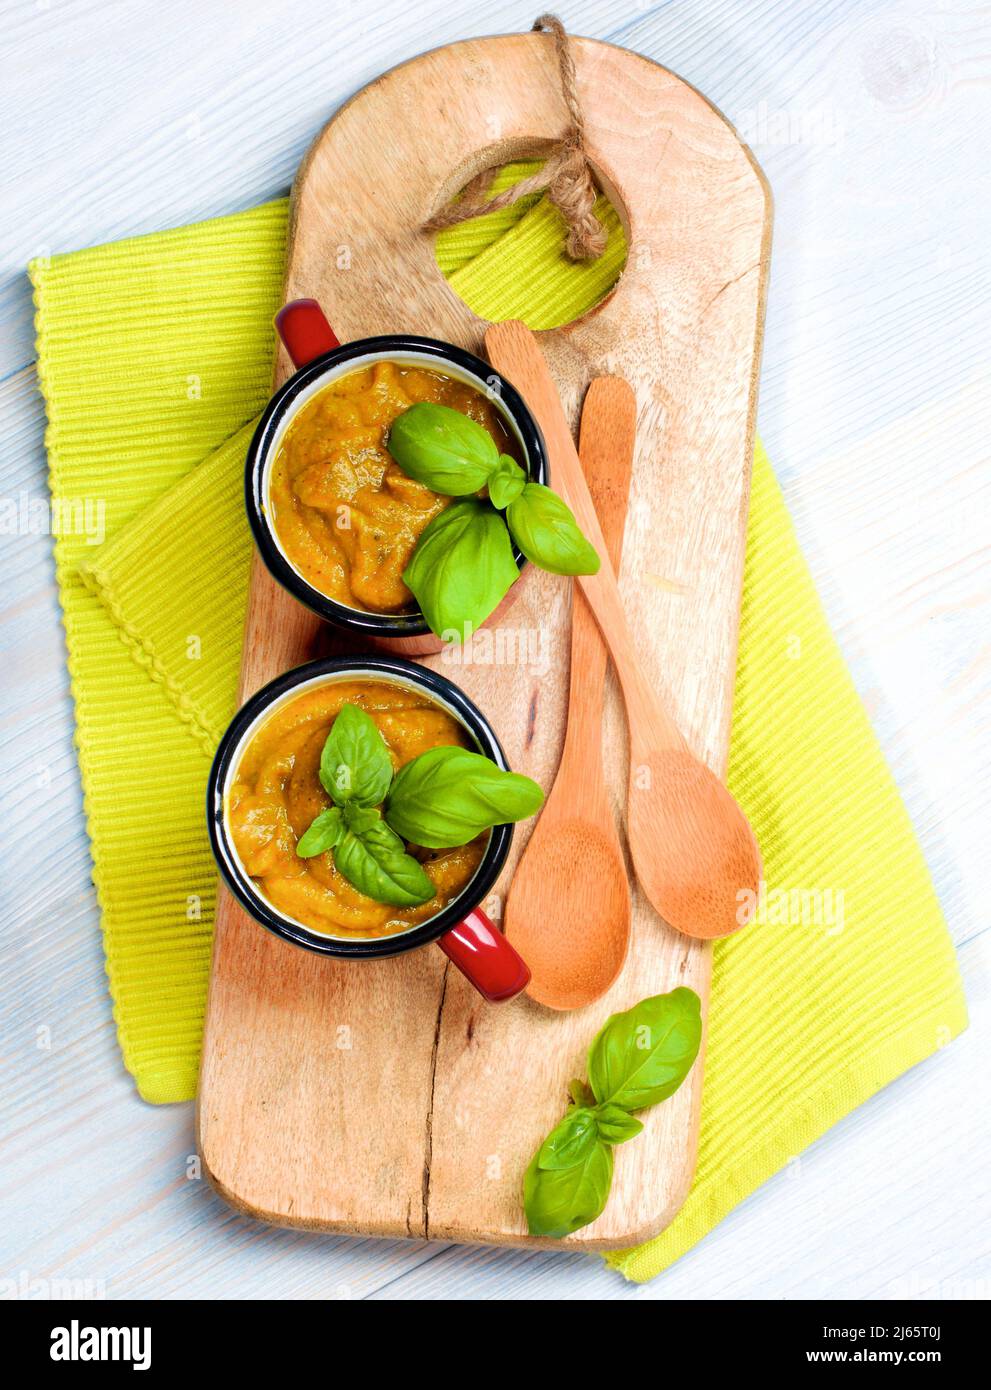 Delicious Vegan Cream Soup in Soup Cups with Wooden Spoons with Basil on Serving Board. Top View Stock Photo